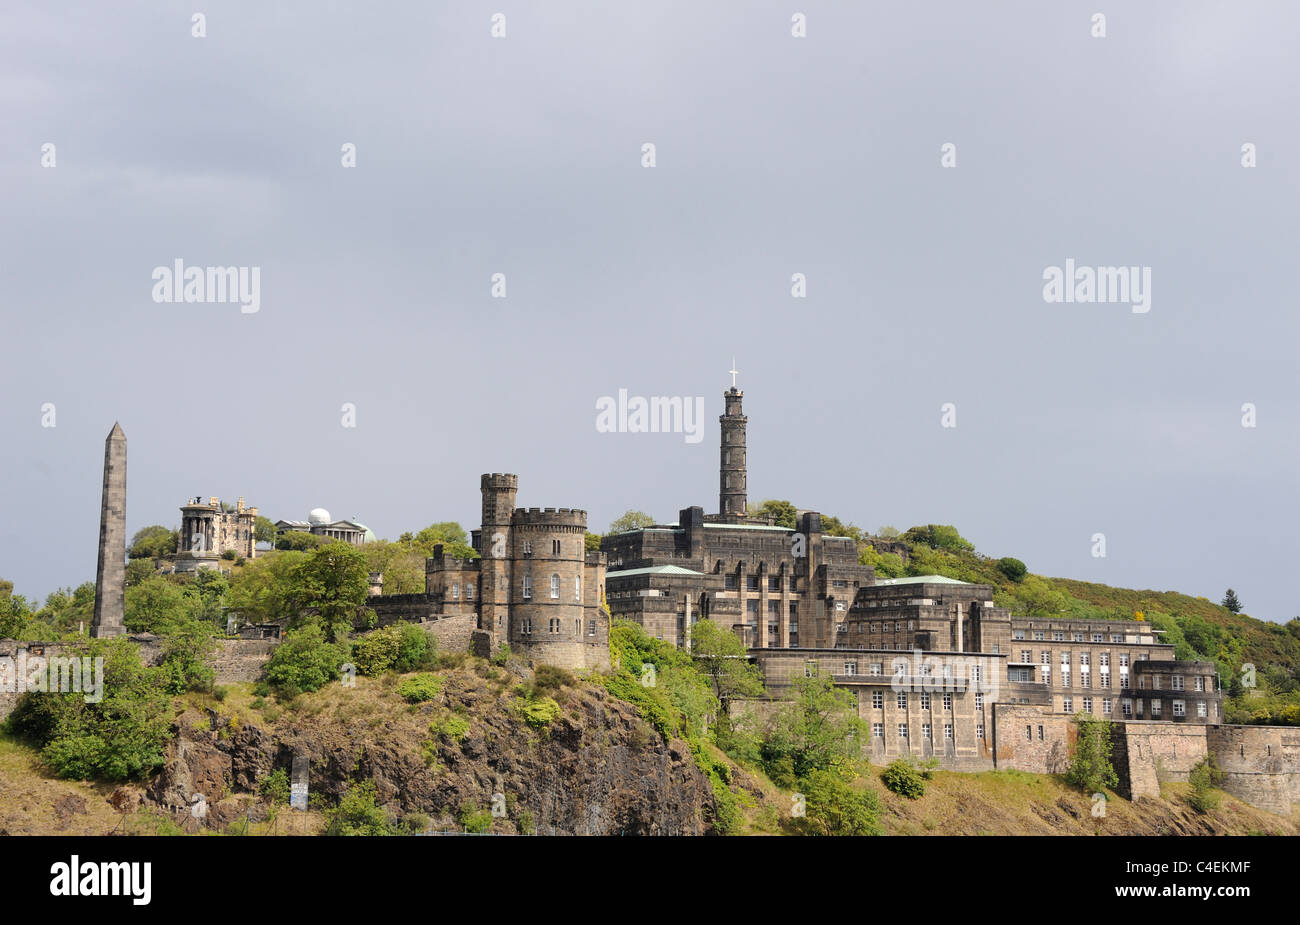 St Andrew's House at Calton Hill Edinburgh. The circular building left of center is the Governor's House and Nelson's Column top Stock Photo